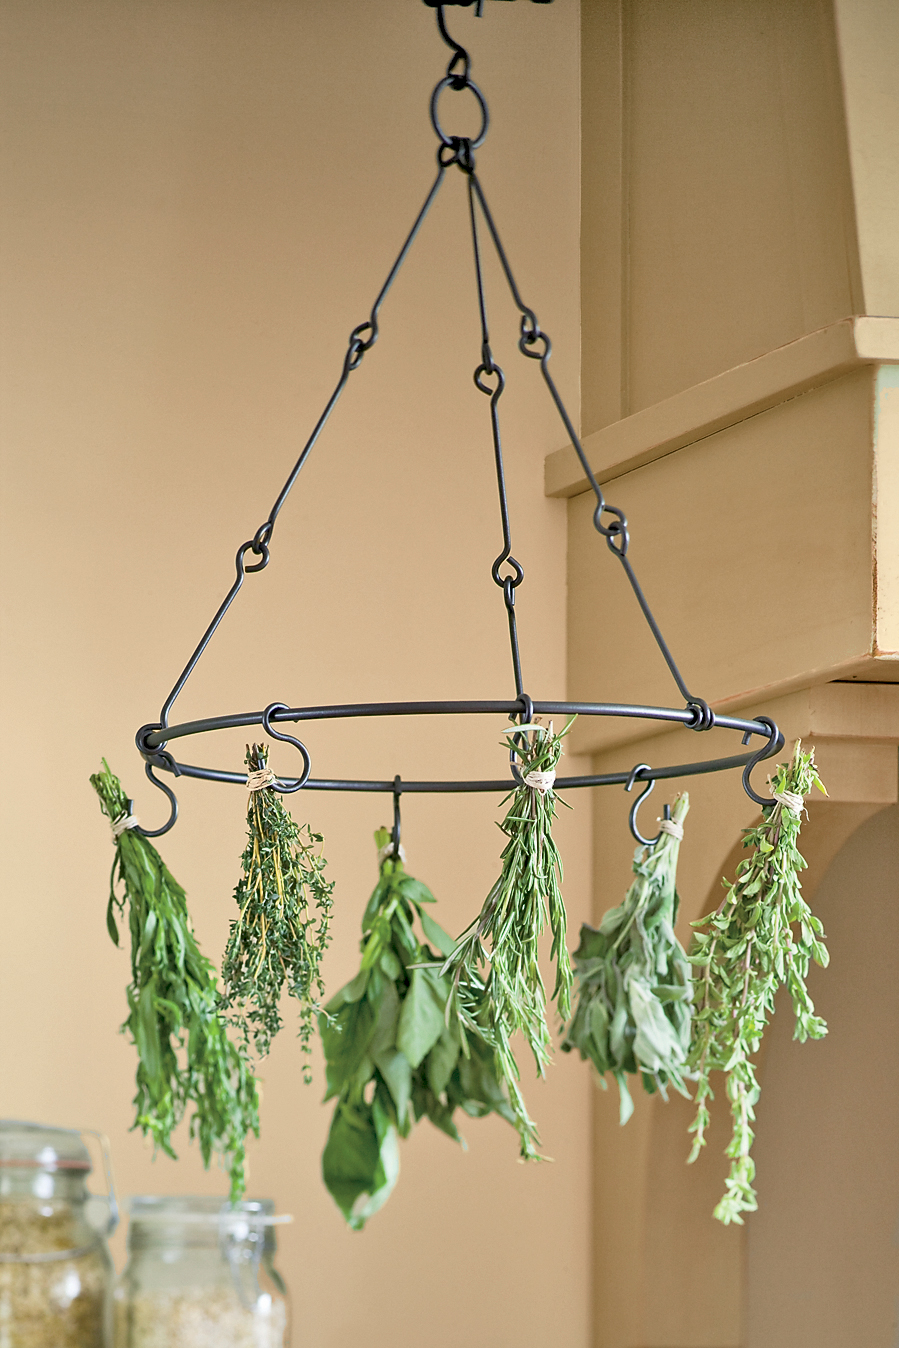 Herbs can easily be hung and dried on drying racks.